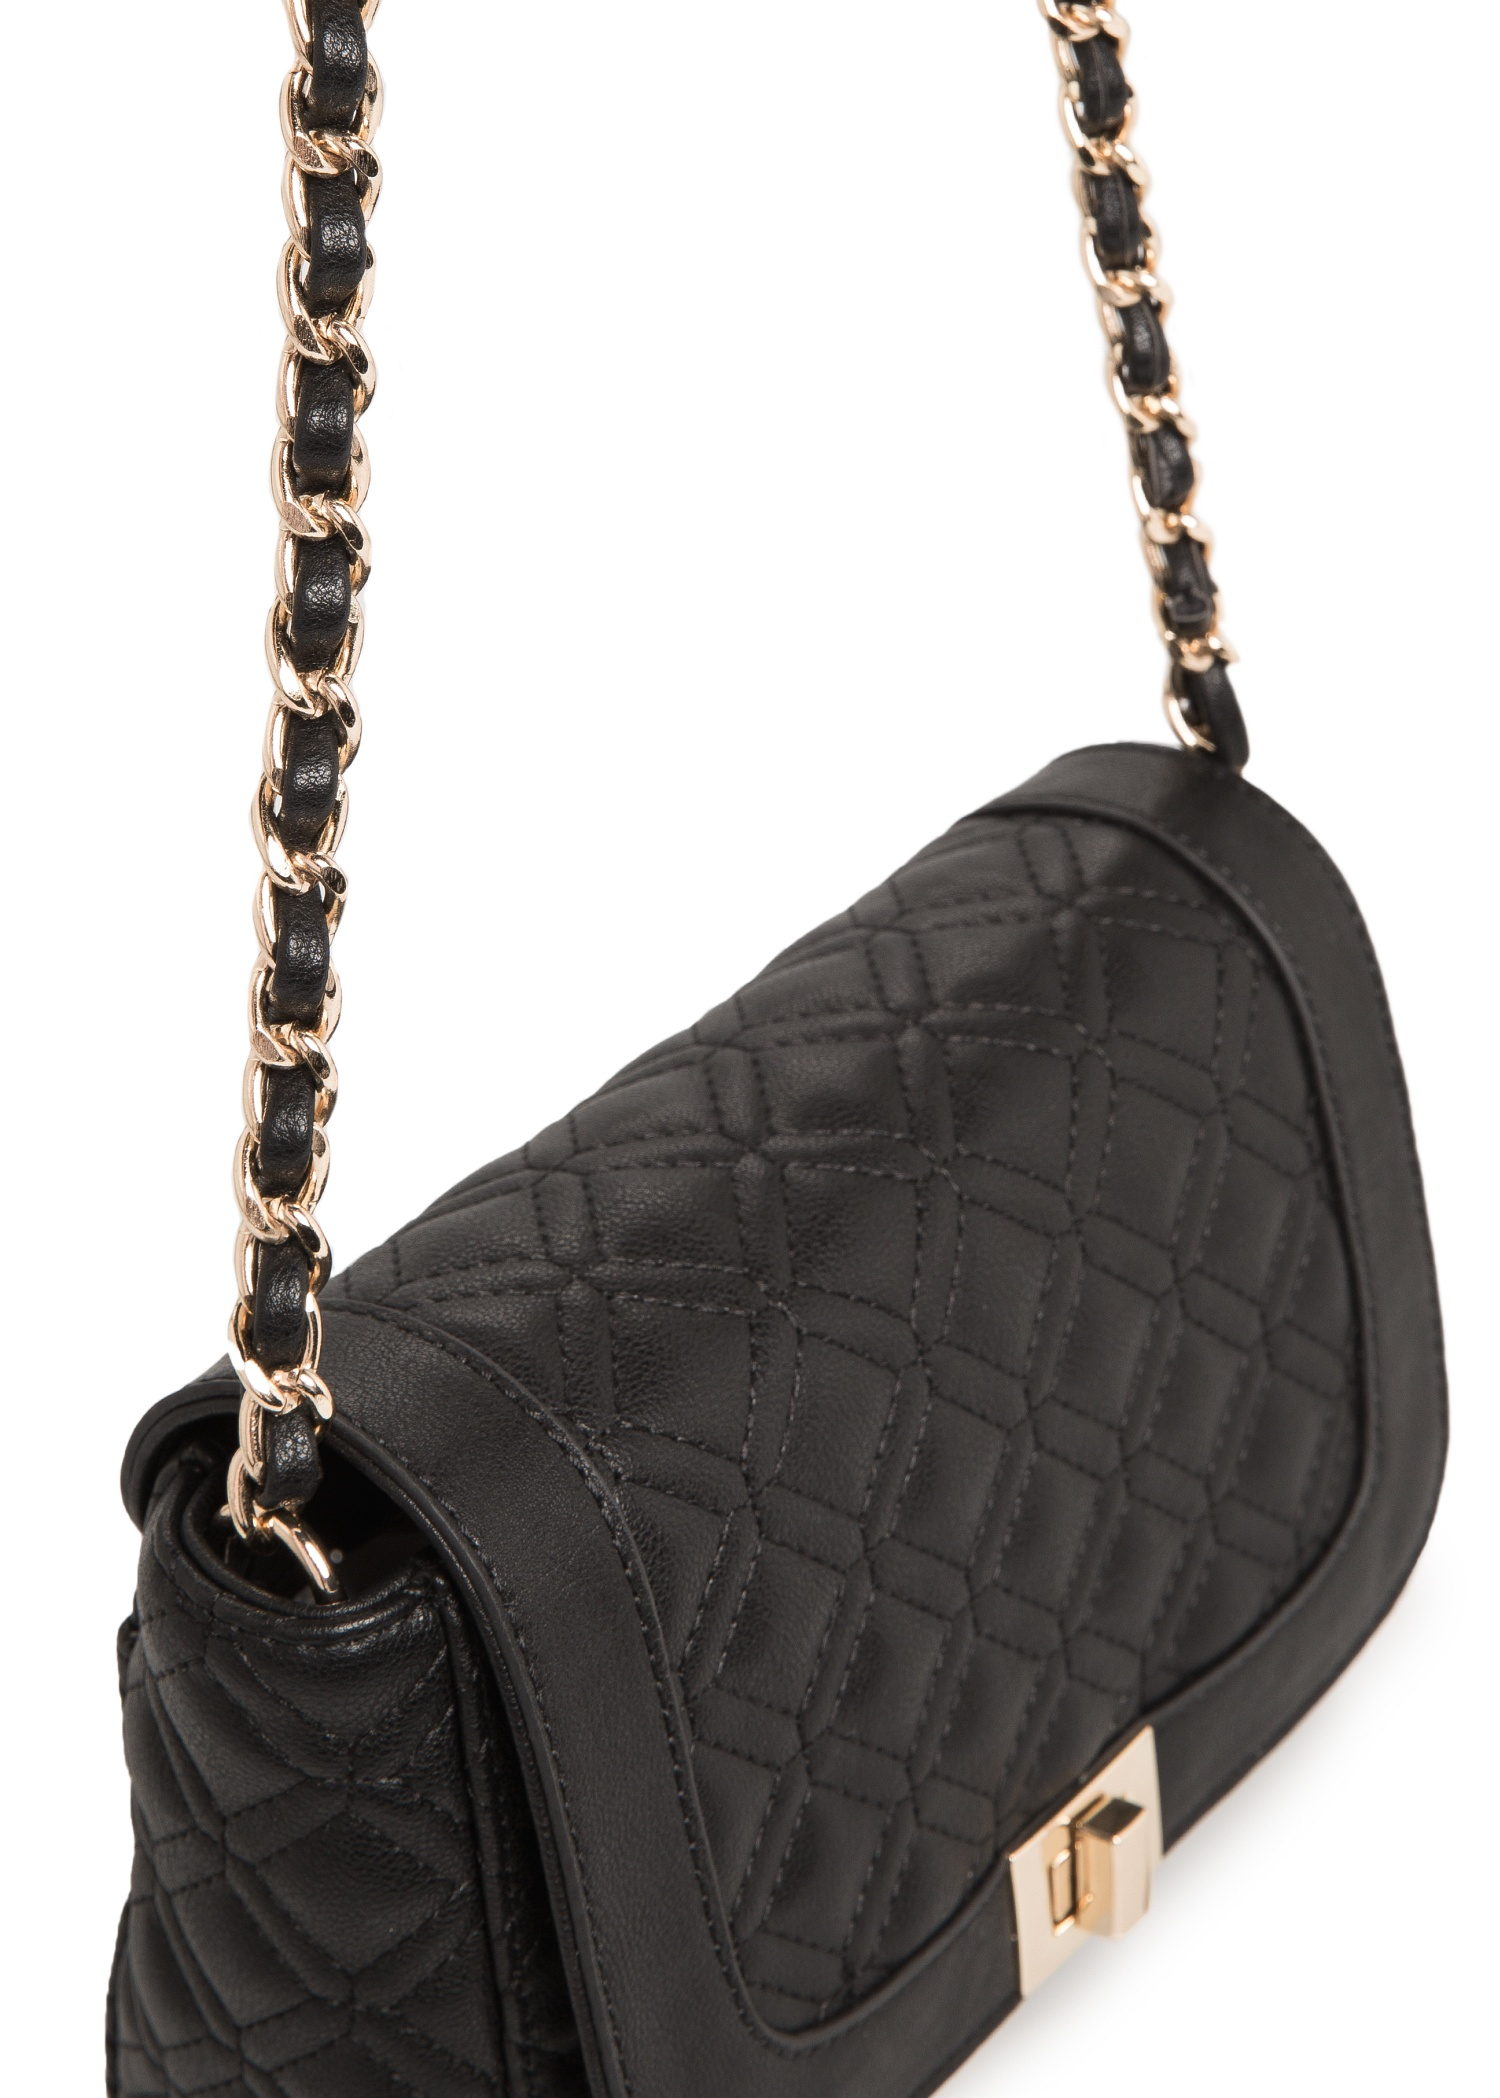 Mango Quilted Cross-Body Bag in Black - Lyst